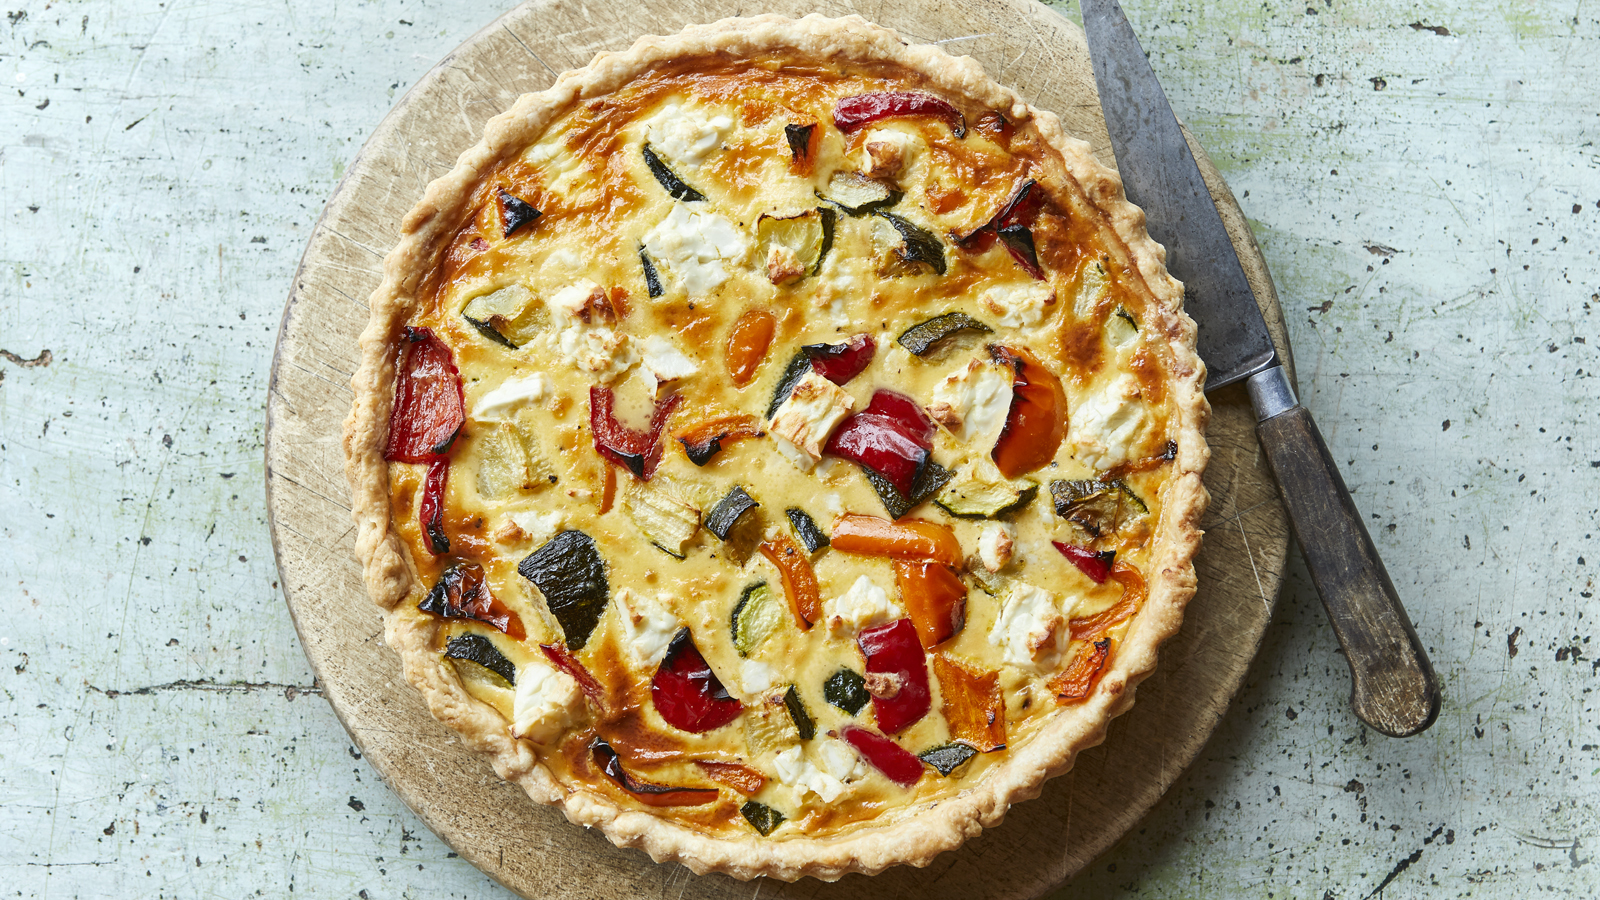 Roasted summer vegetable and feta quiche recipe - Food